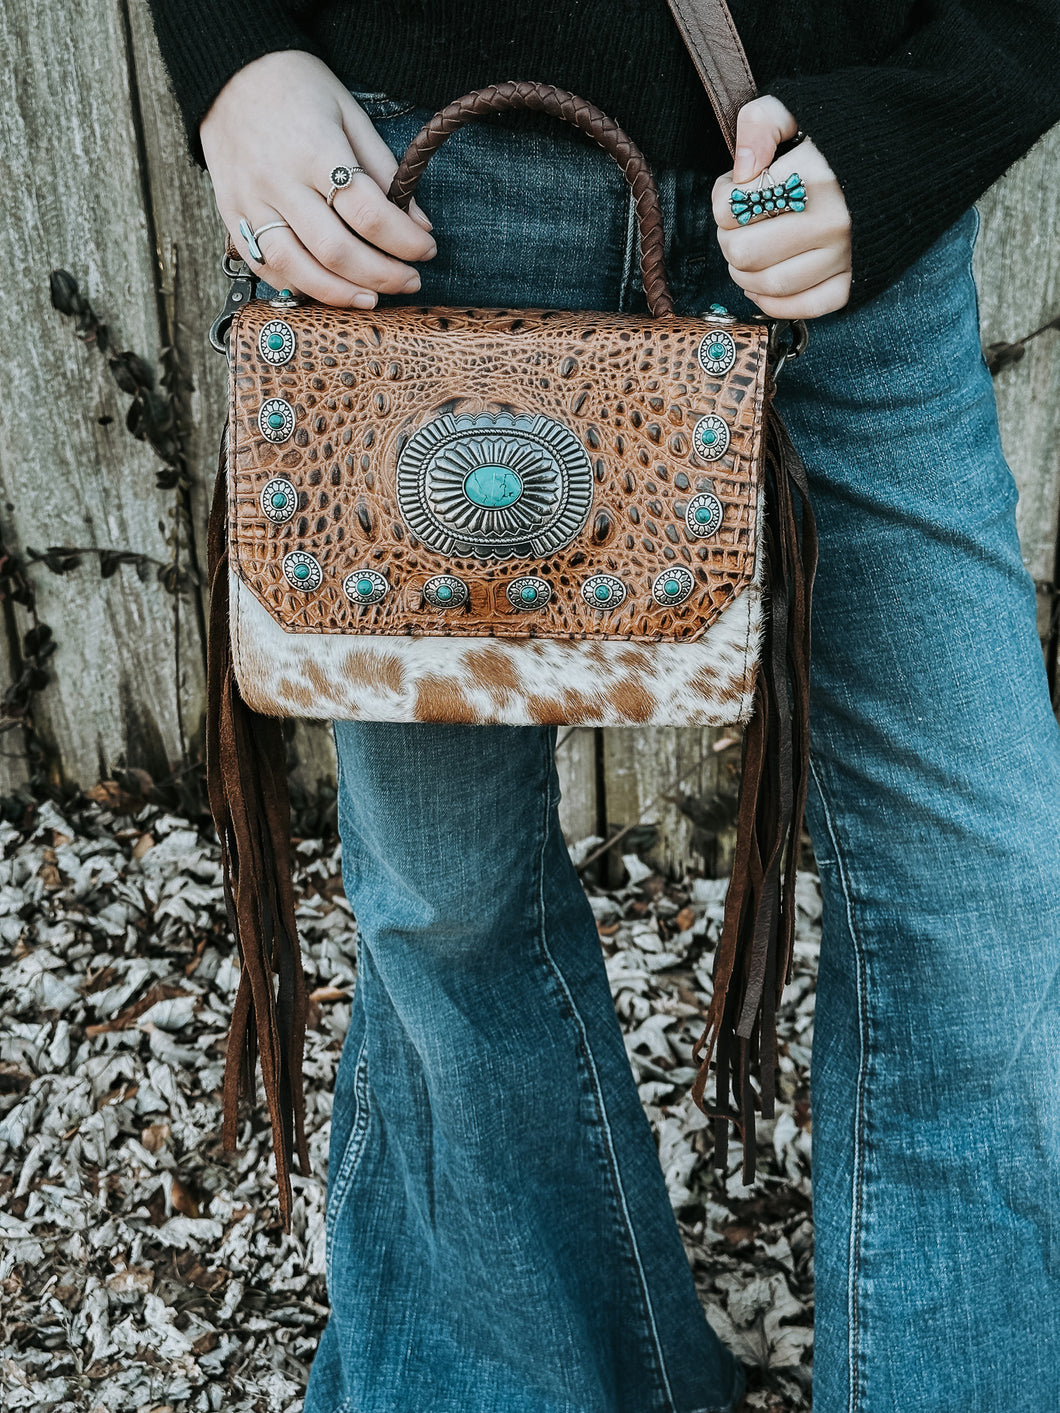 The Riddle Purse